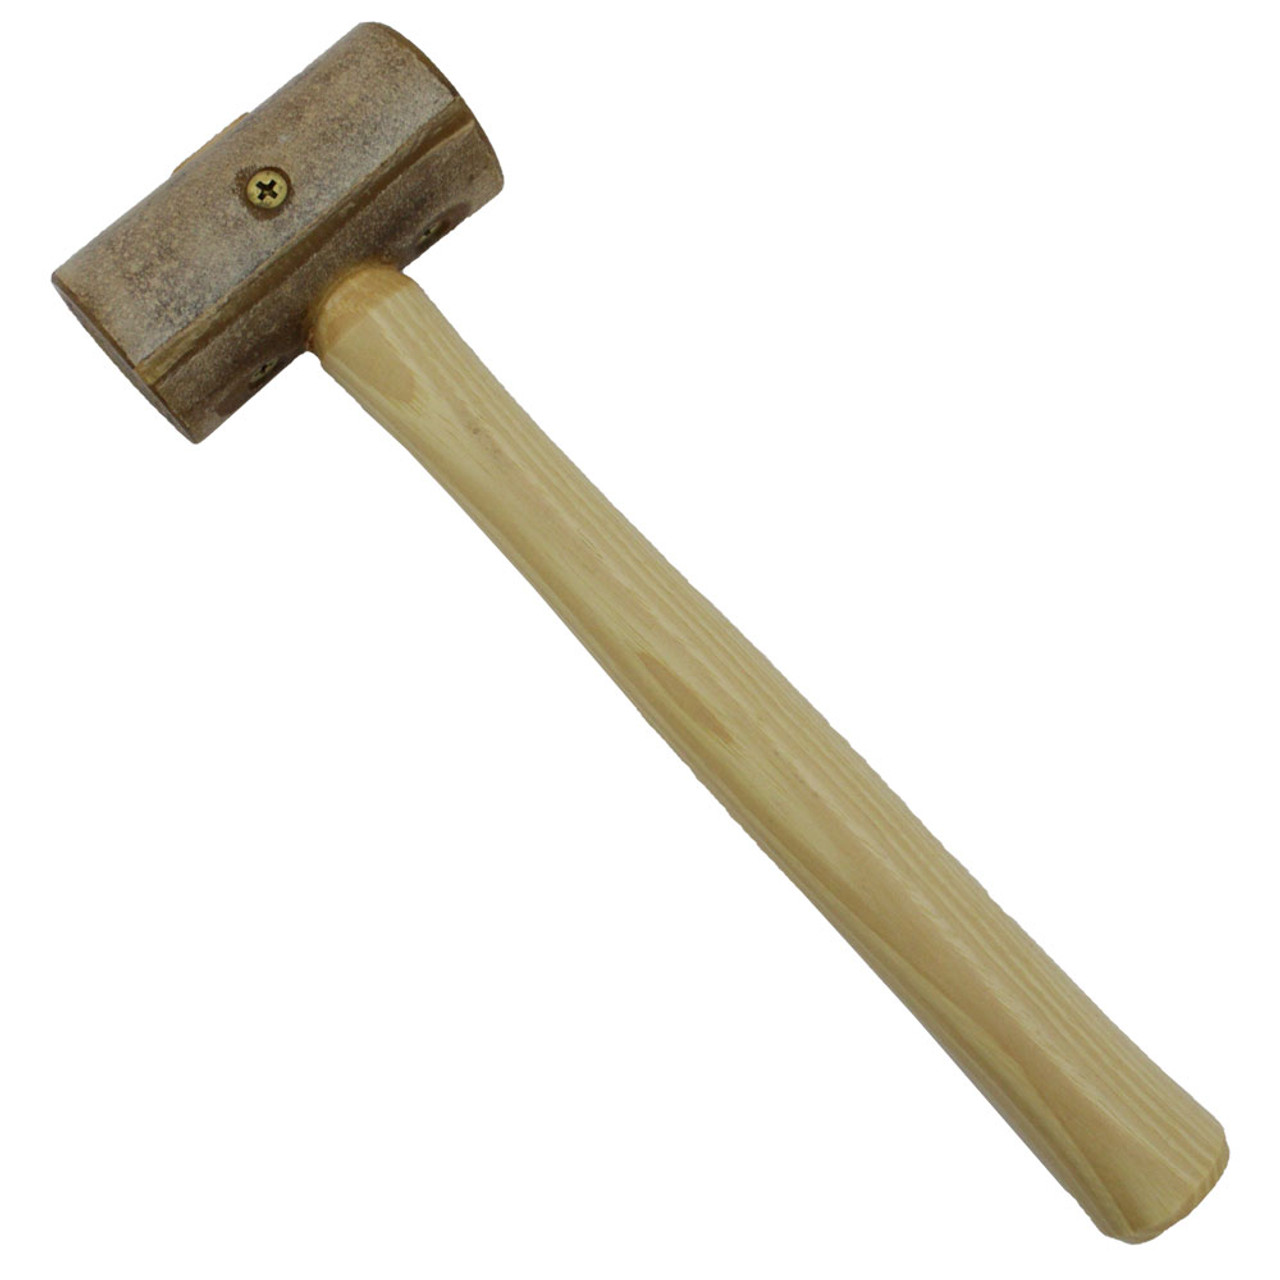 Premium Rawhide Mallet Hammer for Jewelry or Metal 9 oz